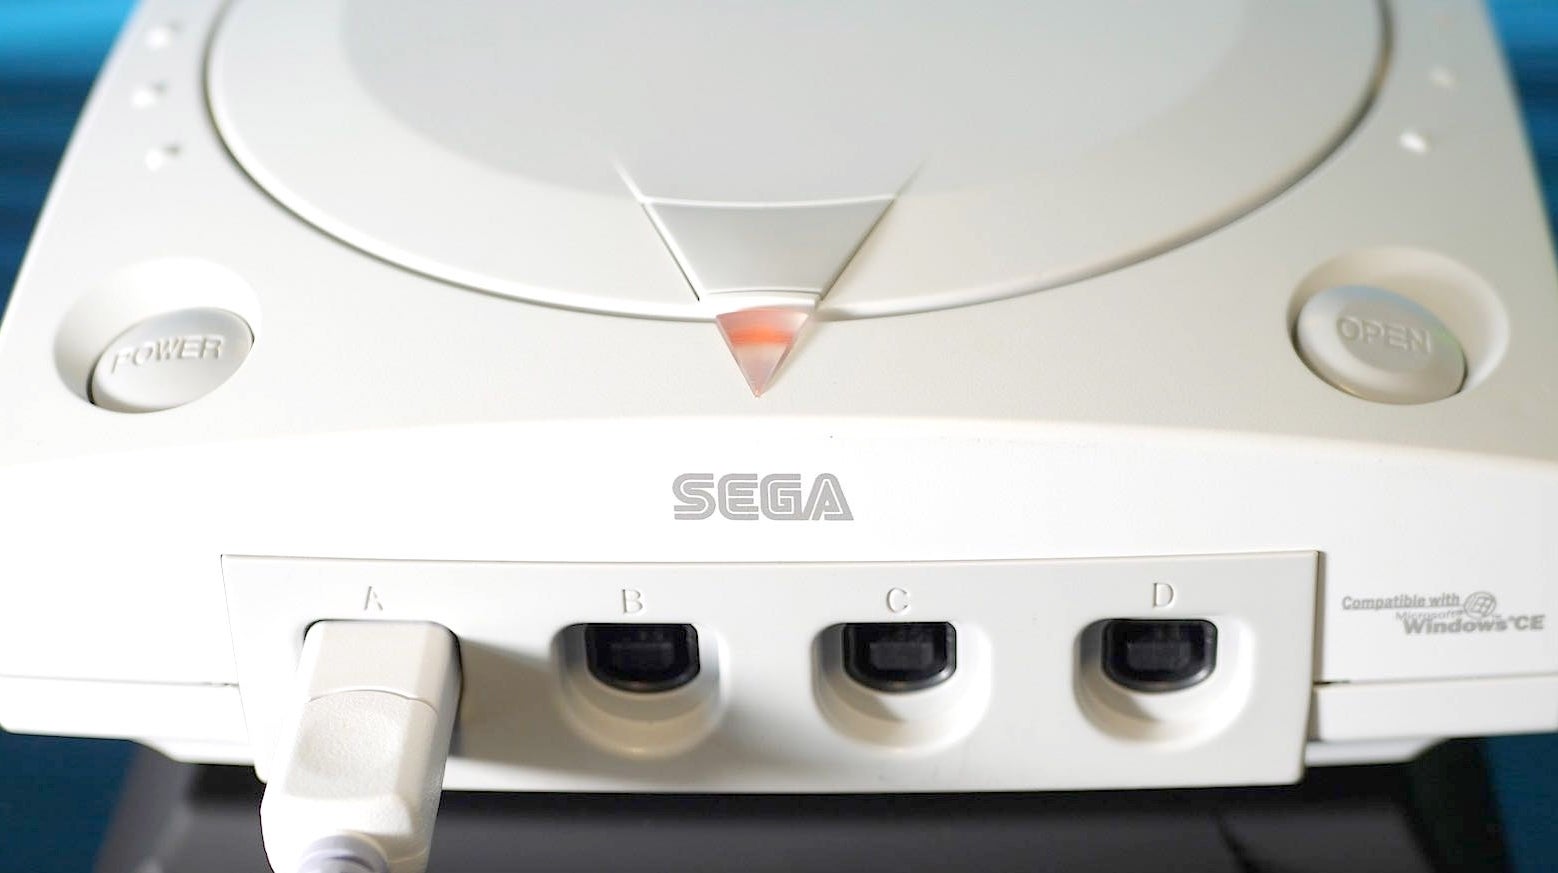 Sega Dreamcast At 20: The Futuristic Games Console That Came Too Soon Games  The Guardian